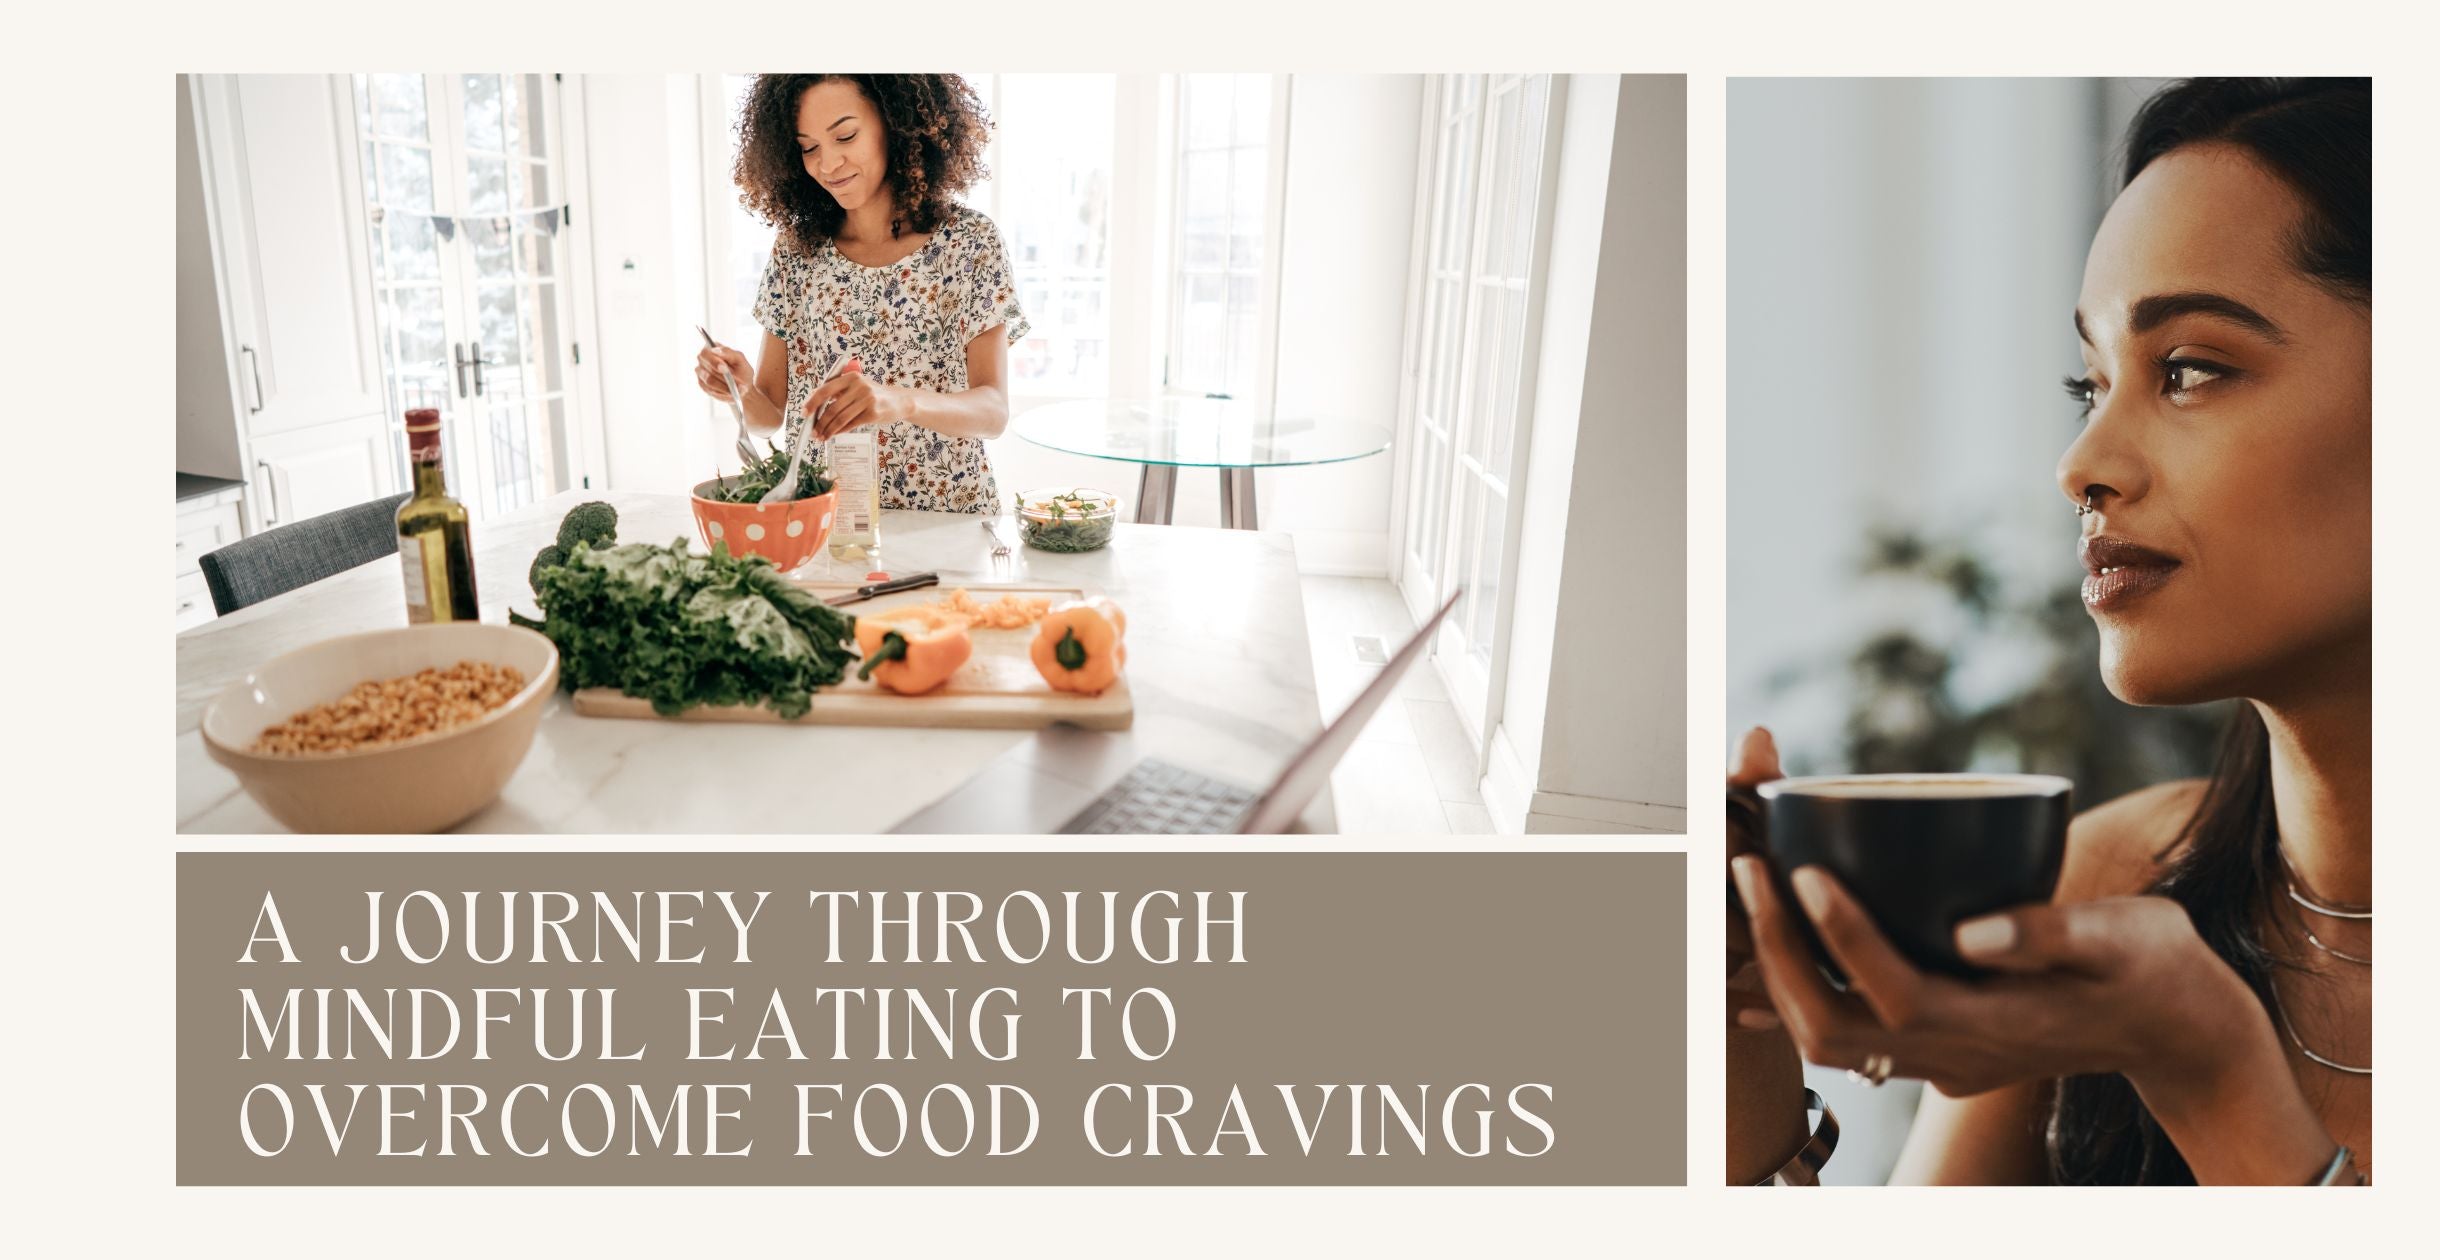 A Journey Through Mindful Eating to Overcome Food Cravings